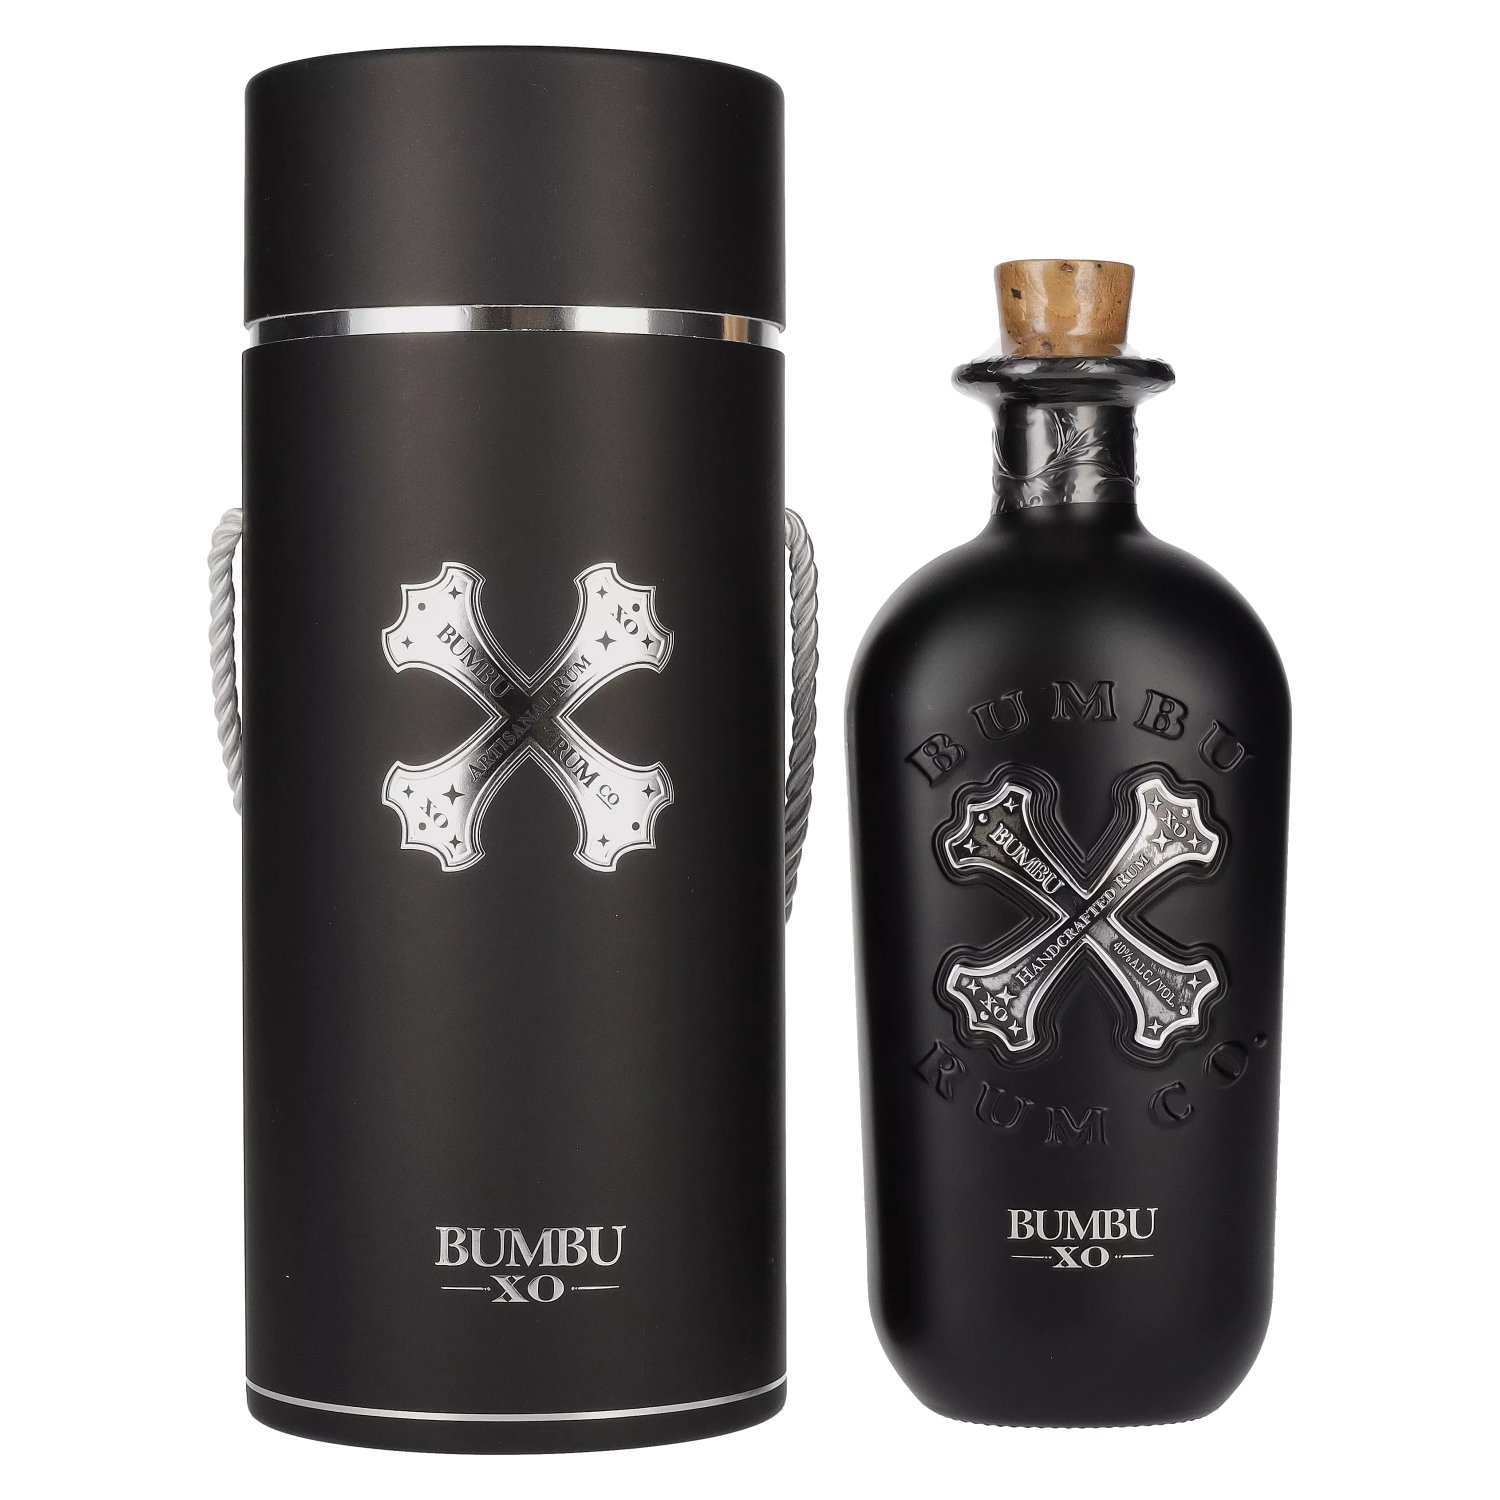 Set Vol. Bumbu 40% in 0,7l Limited XO Giftbox Edition Handcrafted Rum Gift